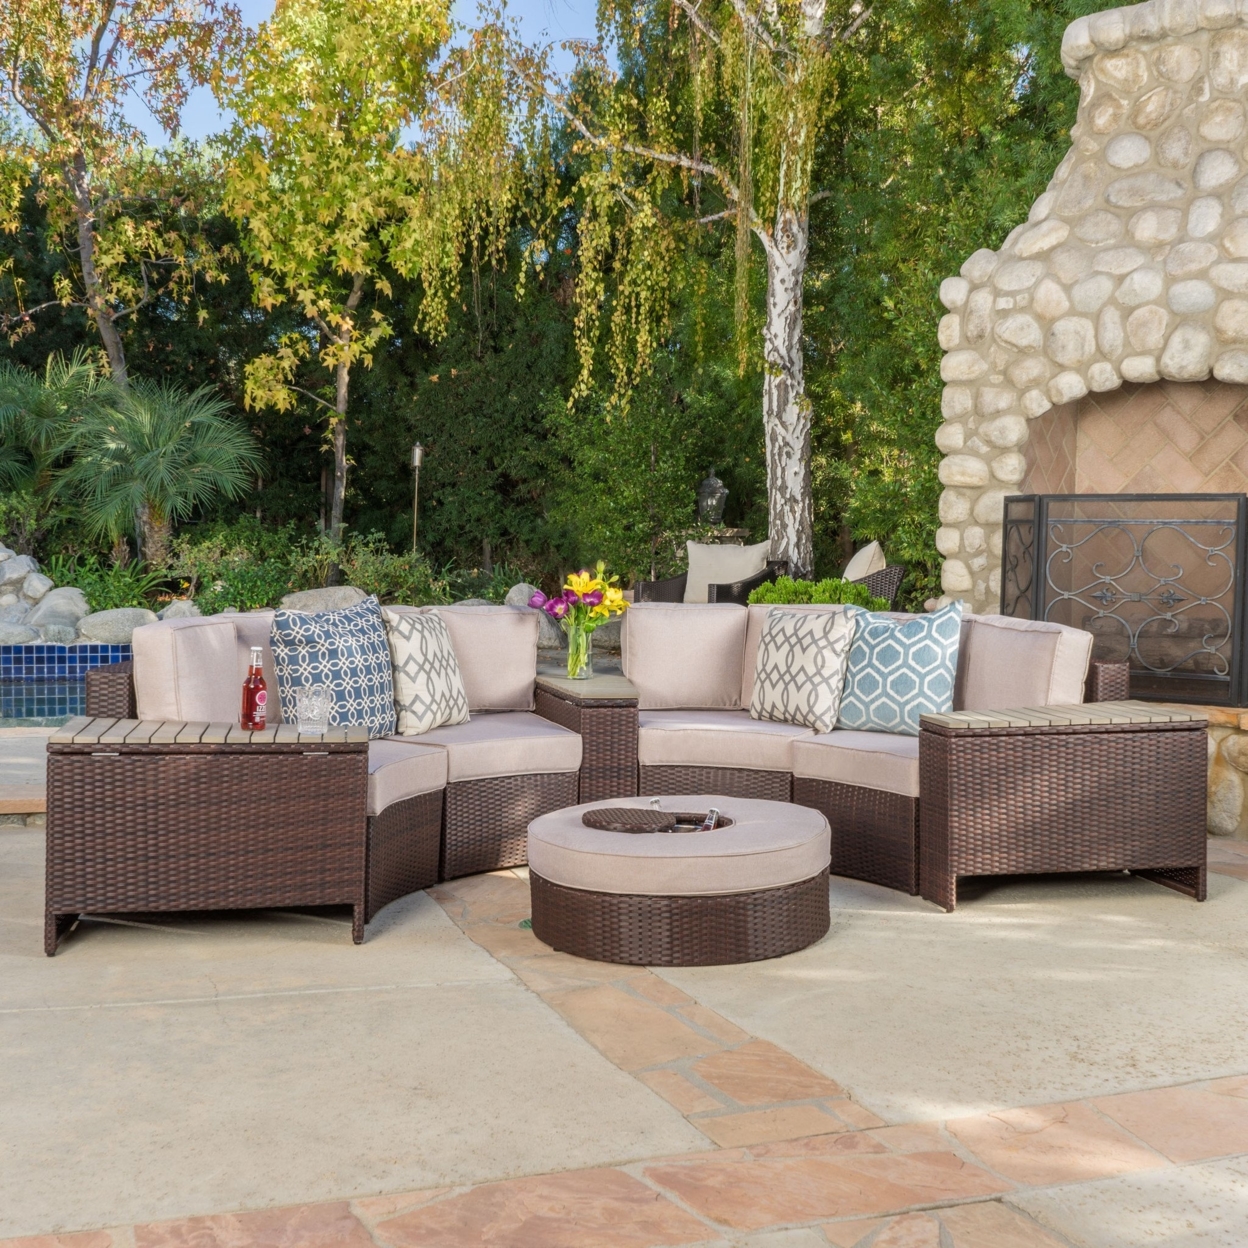 Riviera 8pc Outdoor Sectional Sofa Set With Storage Trunks & Ice Bucket - Beige